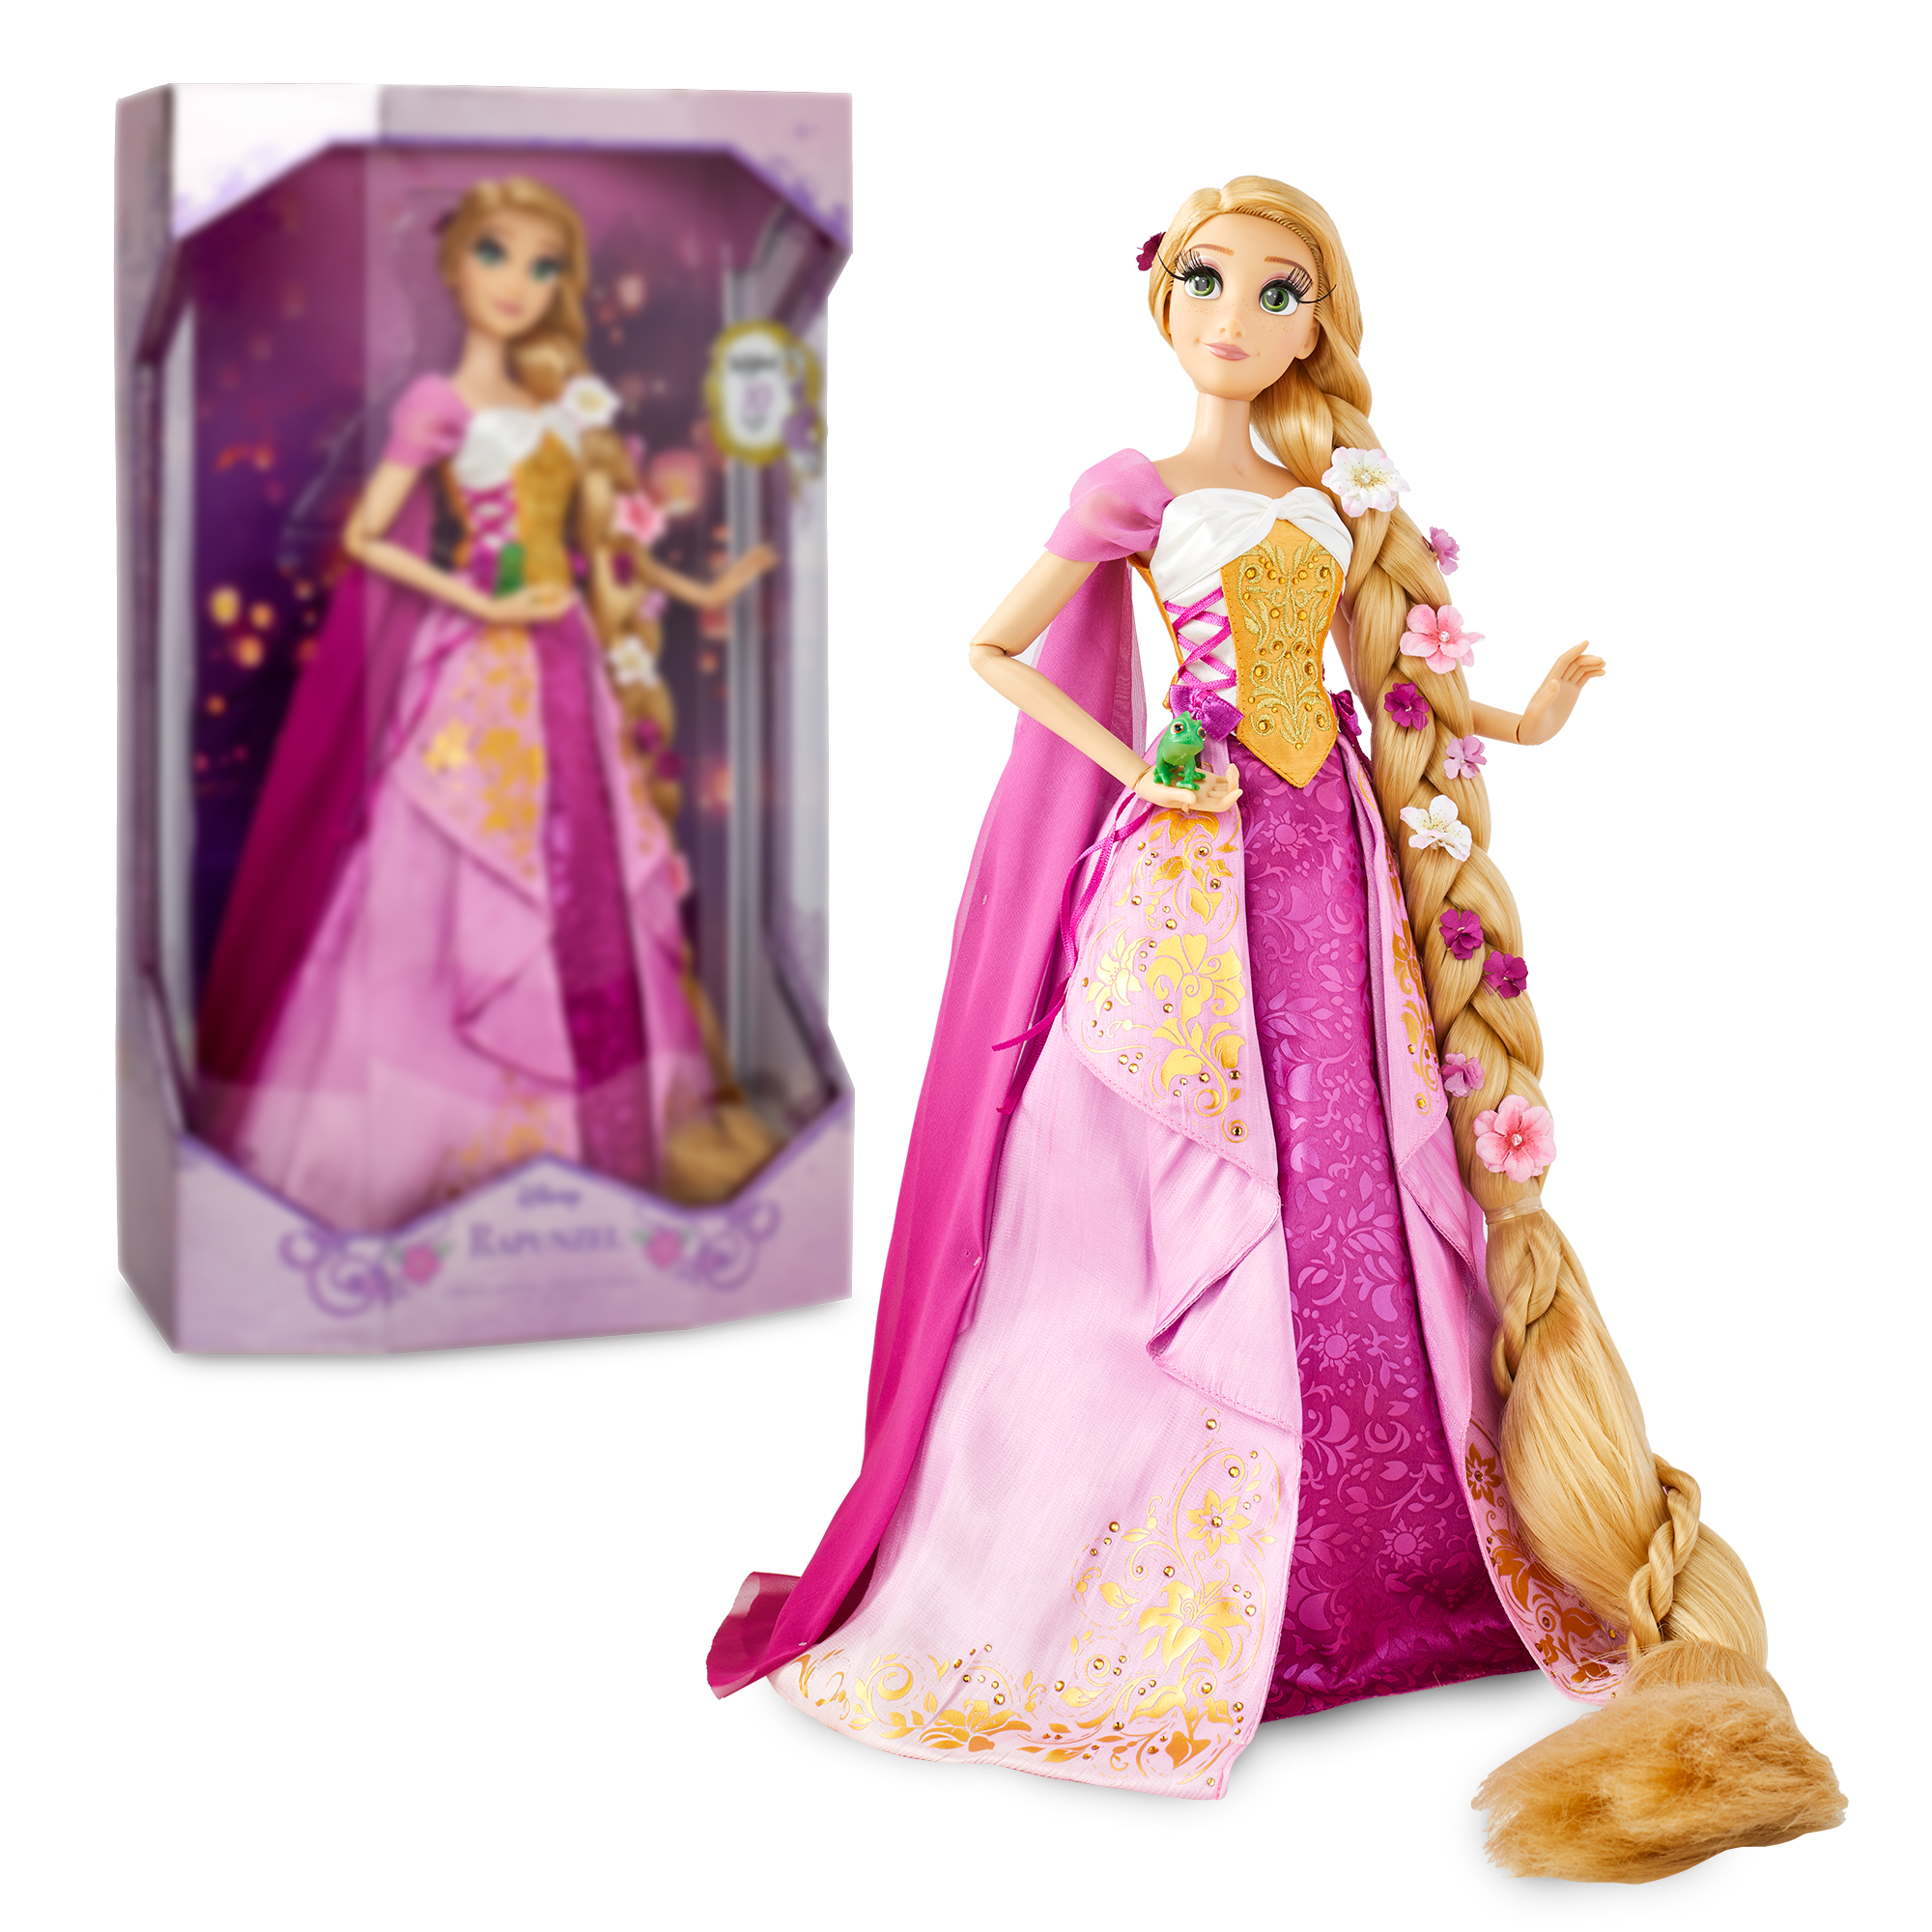 https://static.wikia.nocookie.net/disneydolls/images/f/f9/Rapunzel10thAnniversary1.png/revision/latest?cb=20211113165238